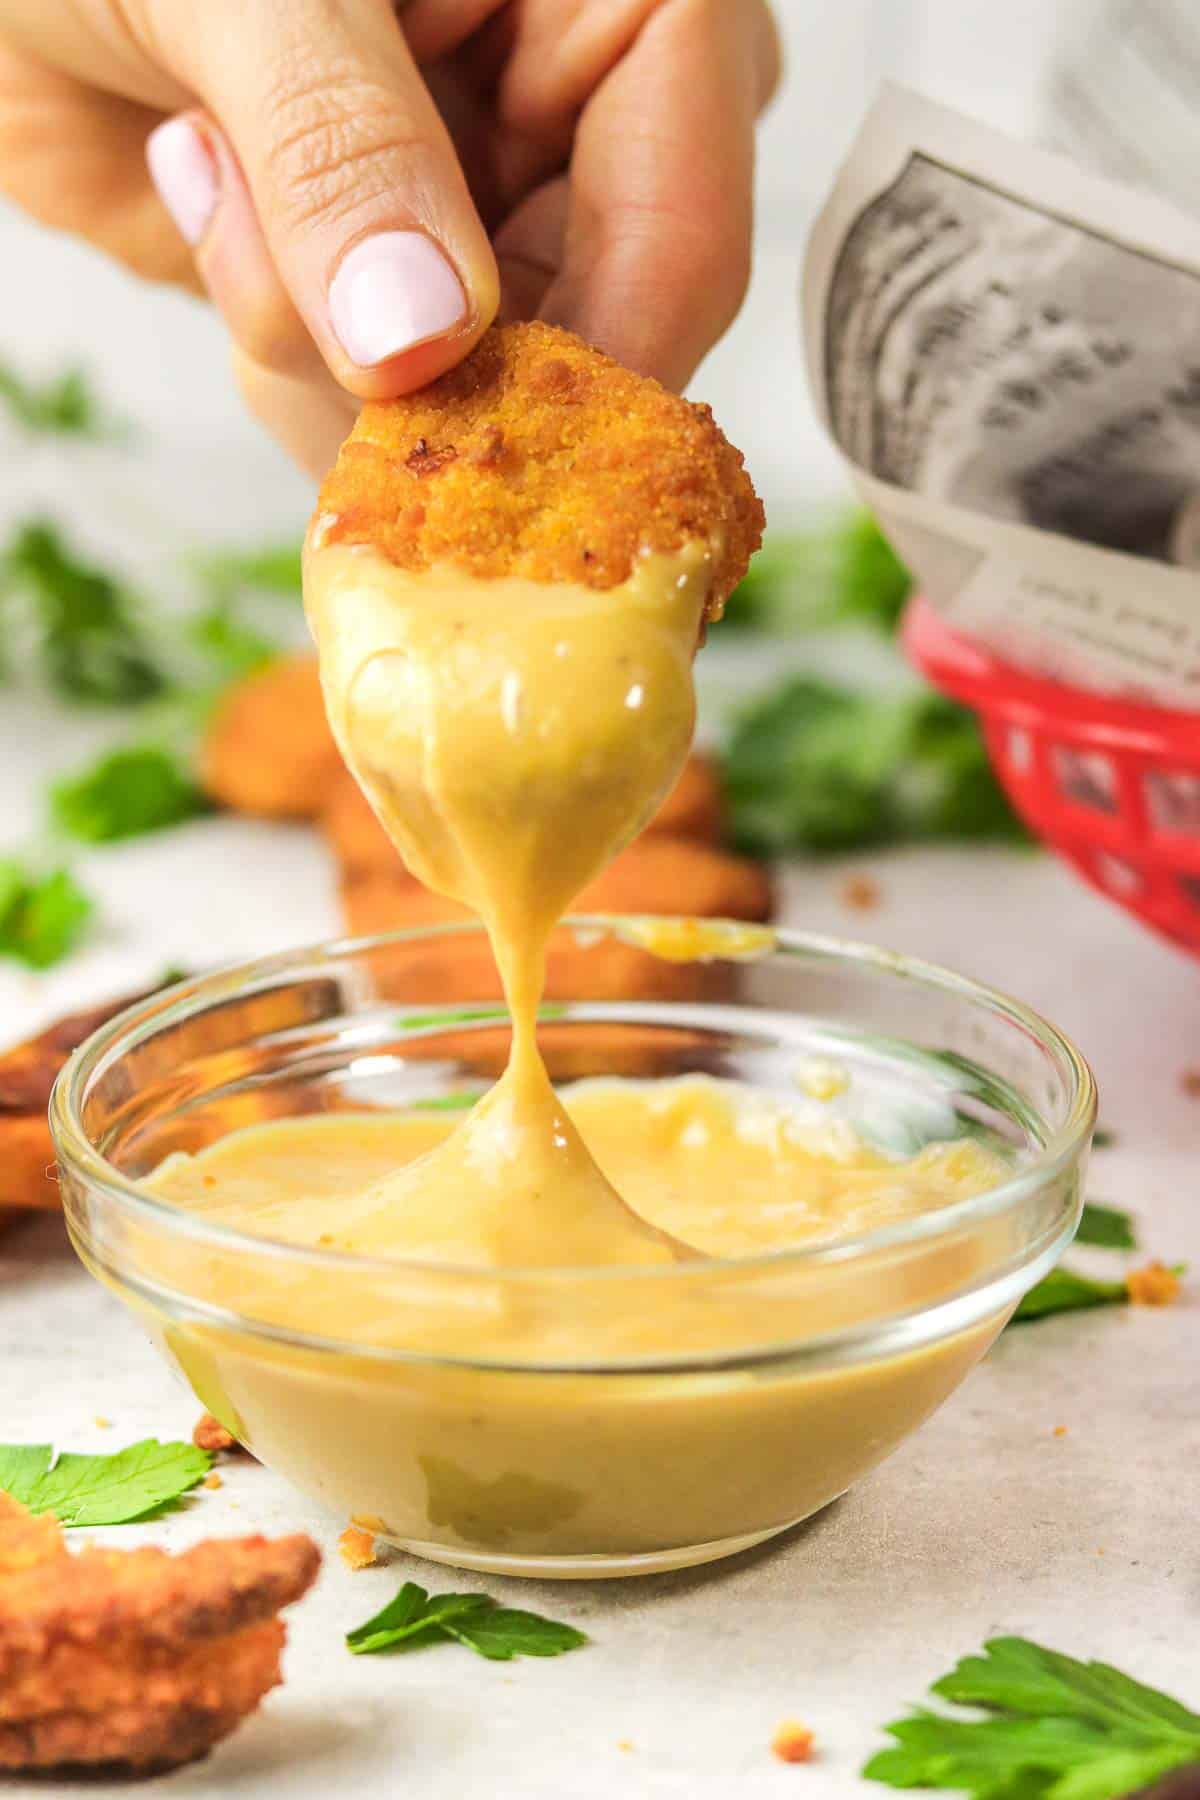 chicken nugget with copycat homemade chick fil a sauce.